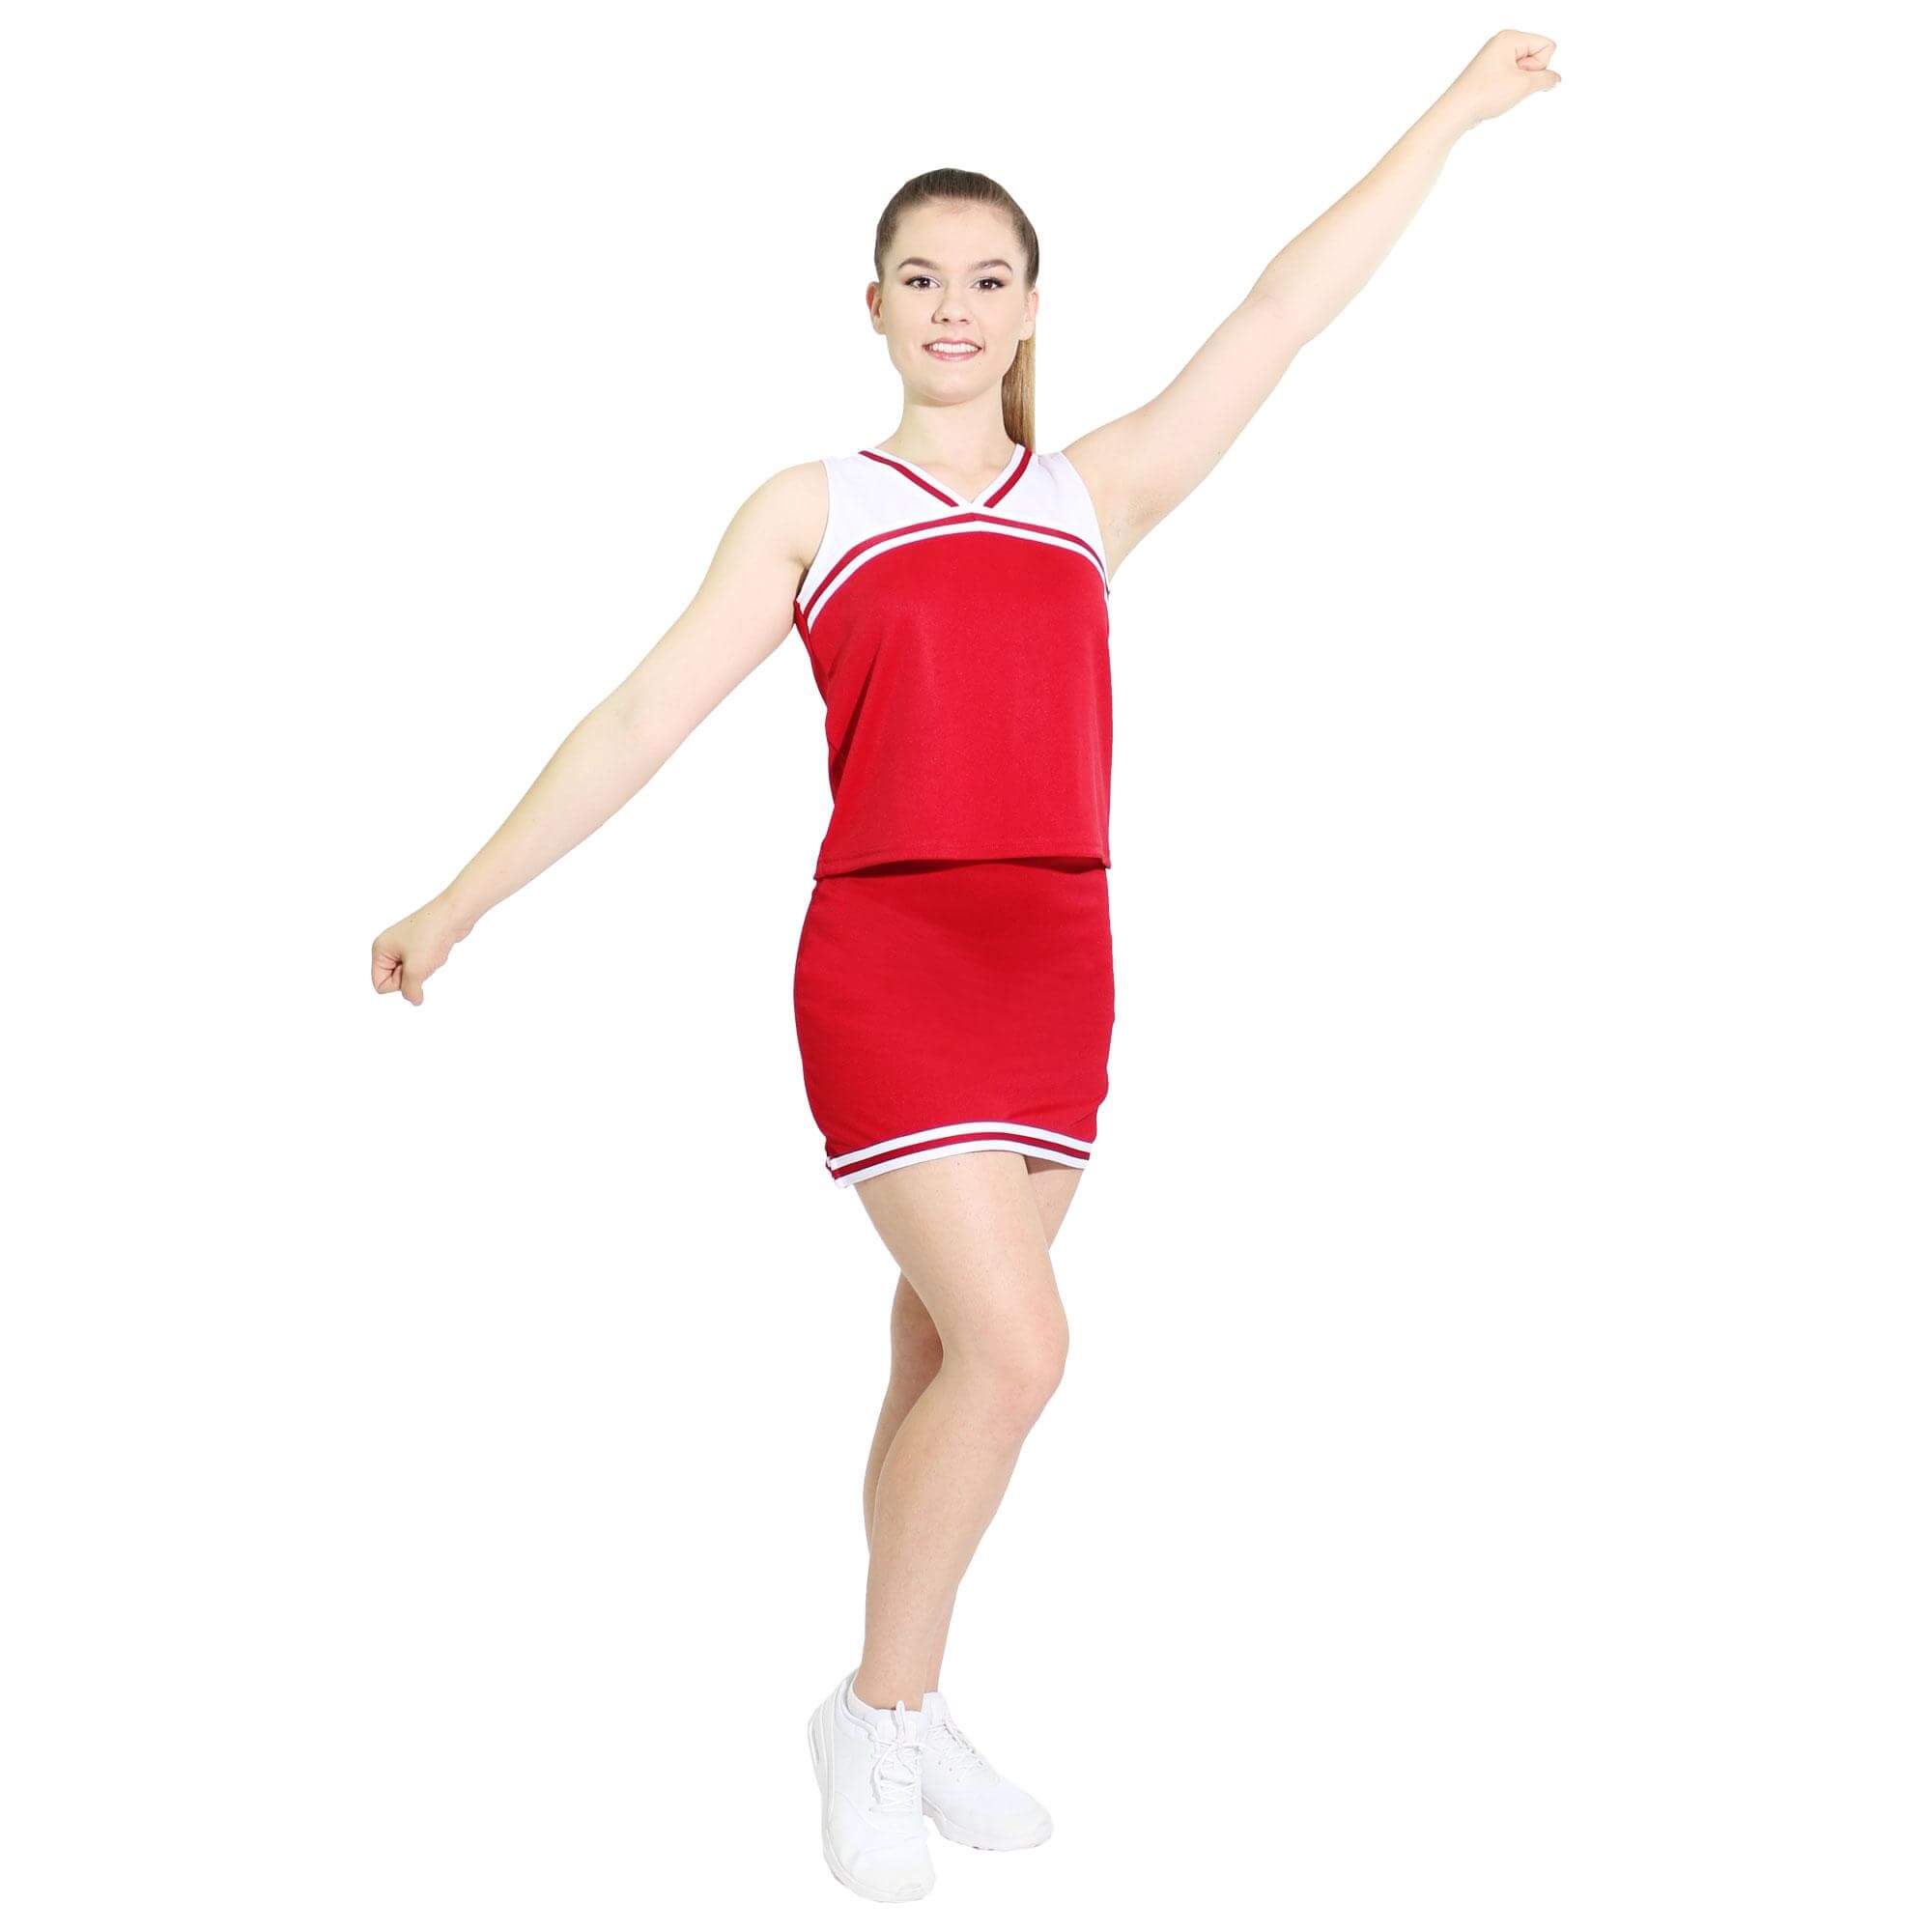 Danzcue Adult Classic Cheerleaders Uniform Shell Top - Click Image to Close